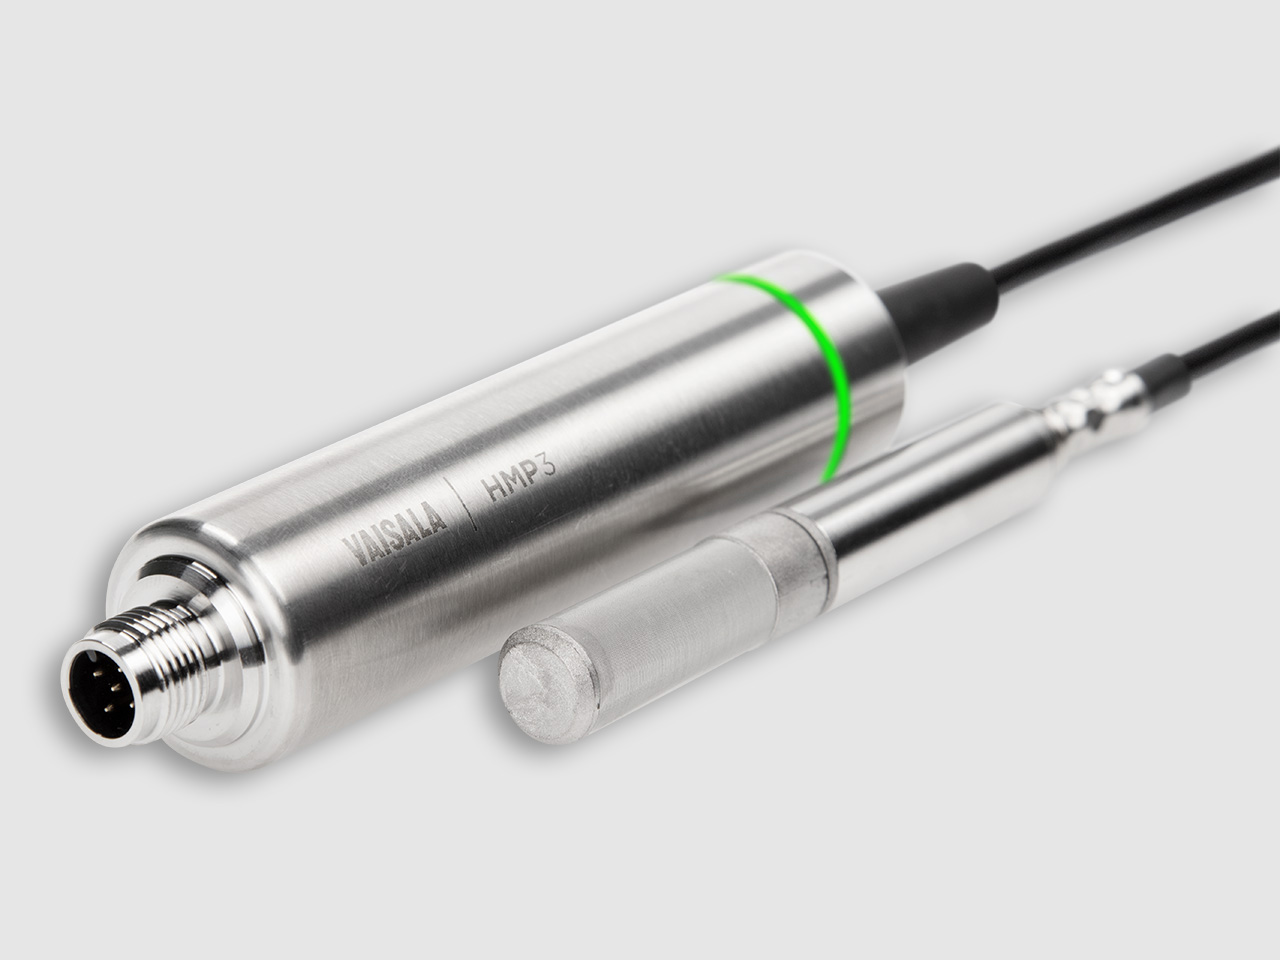 Vaisala HUMICAP ® Humidity and Temperature Probe HMP3 is a general - purpose Probe designed for the processes with moderate Humidity and Temperature levels.